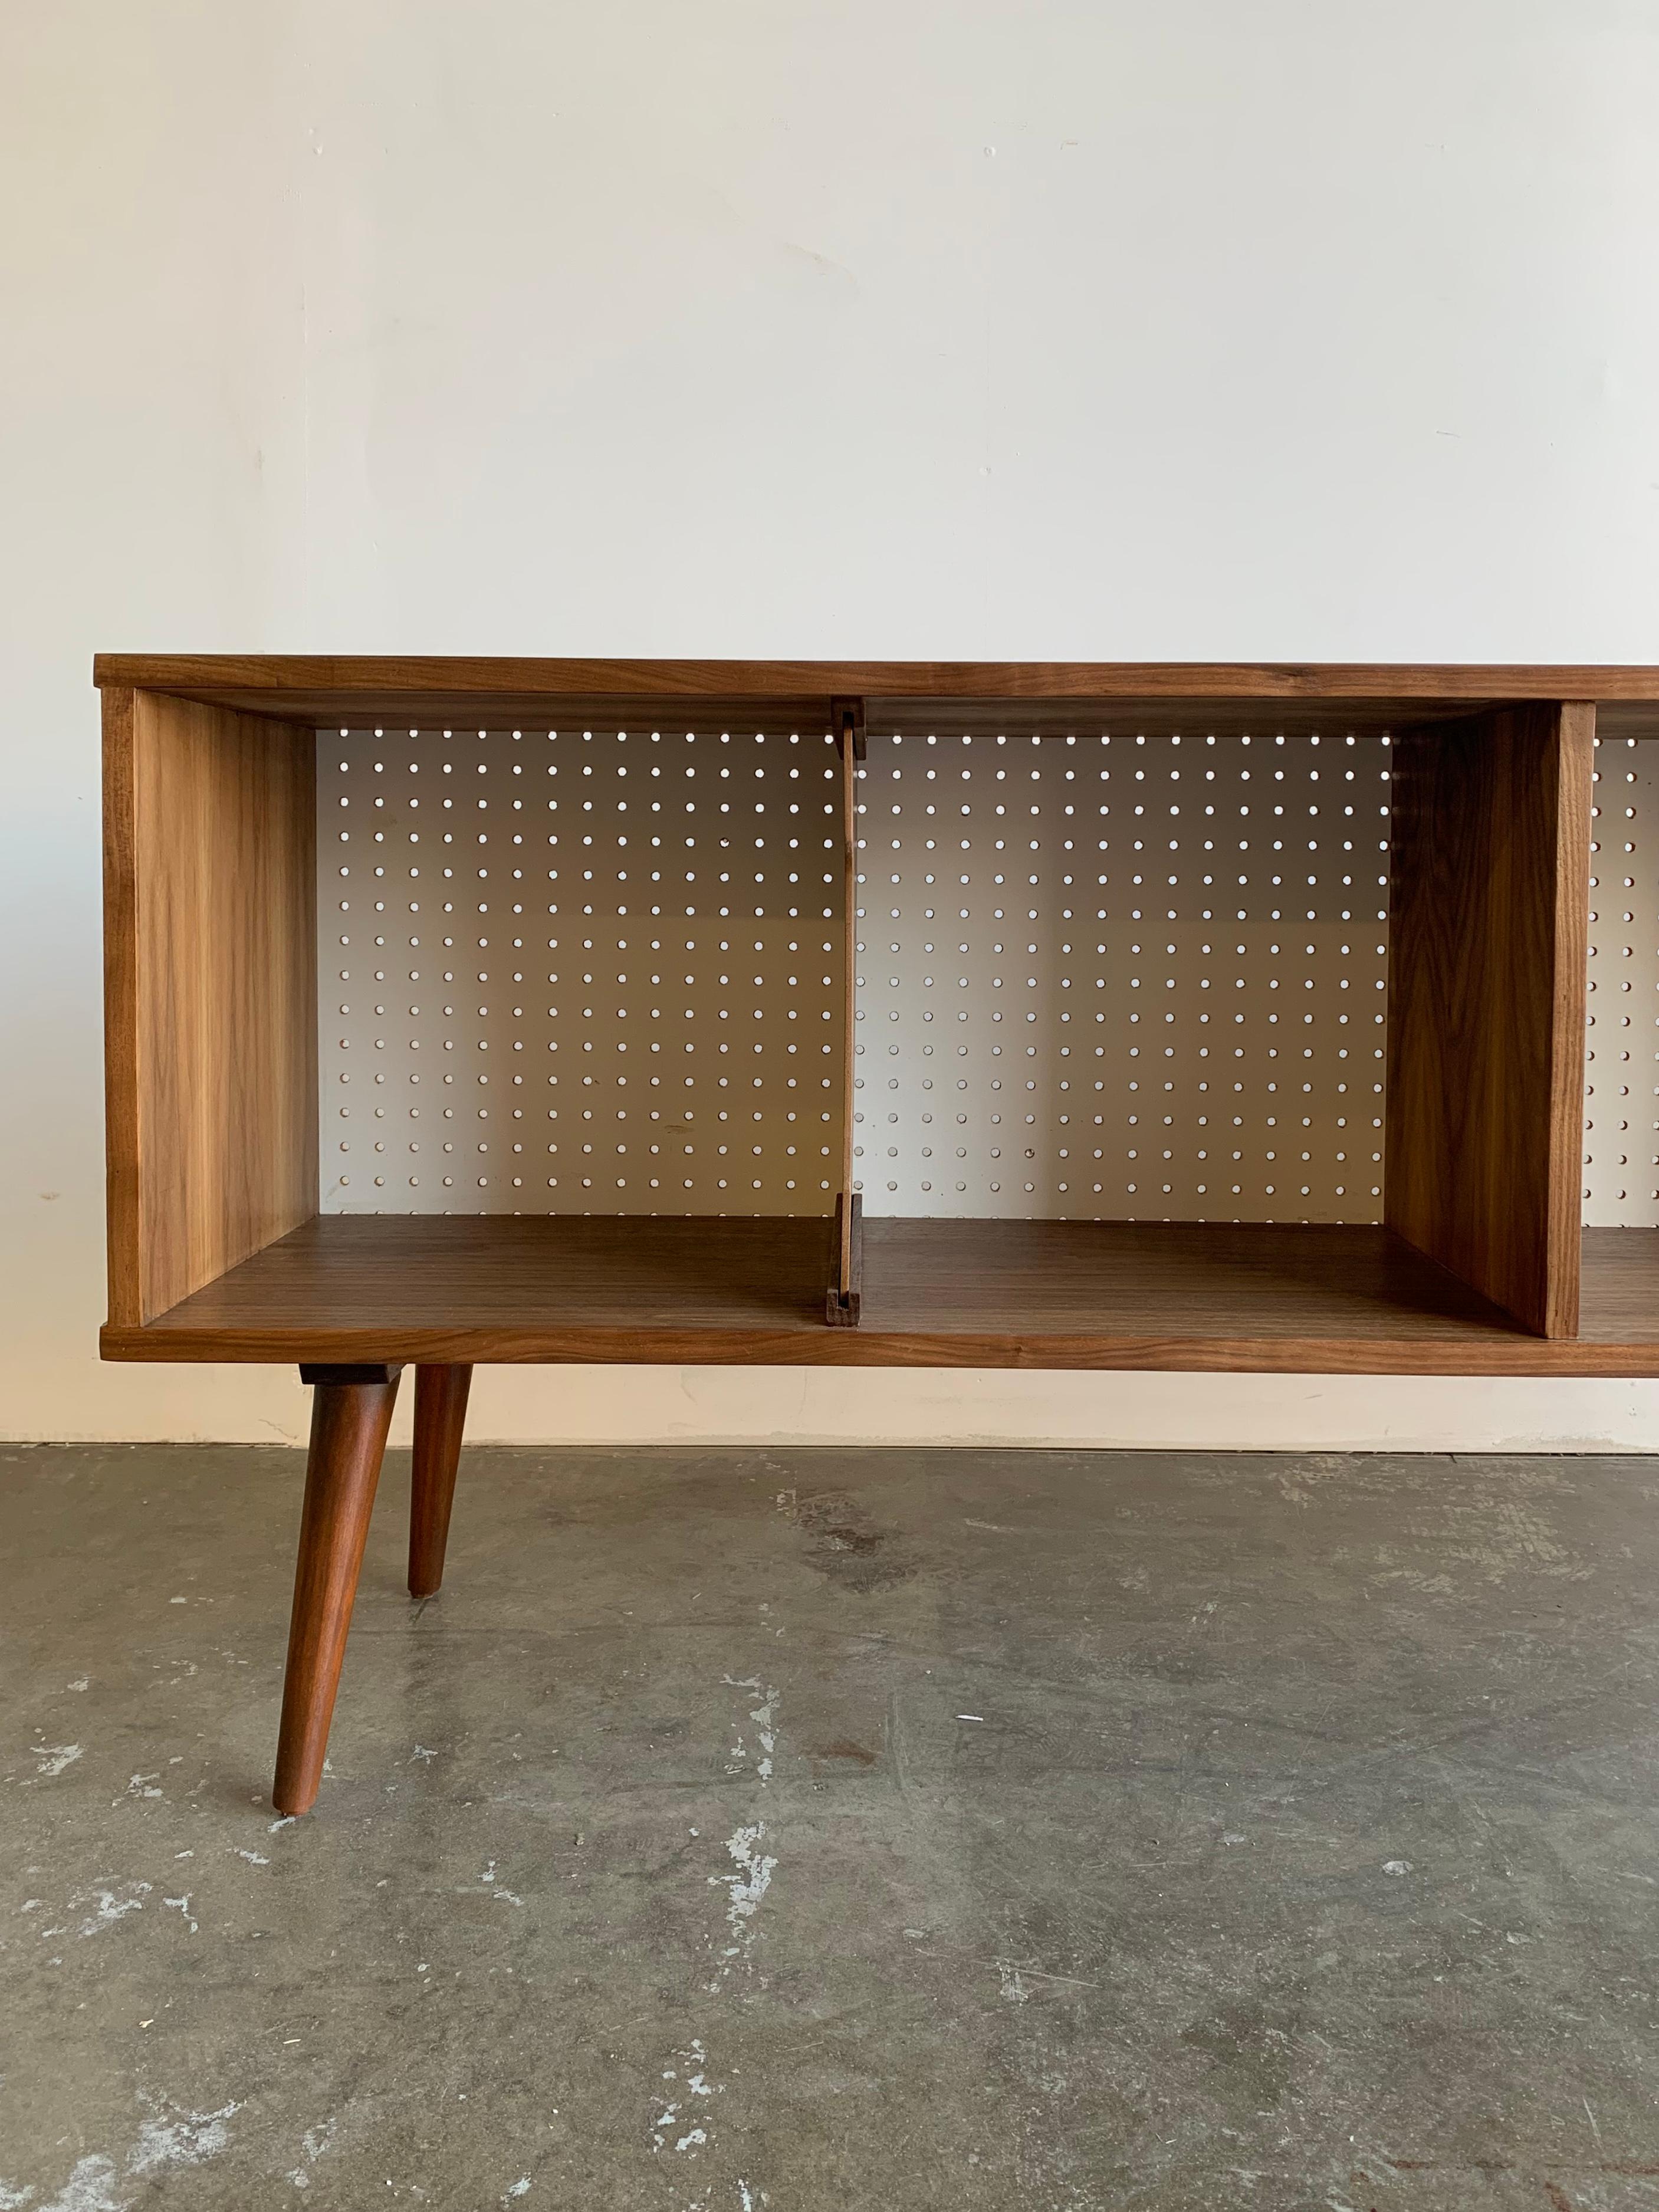 Contemporary Record Holder in Walnut and Perforated White